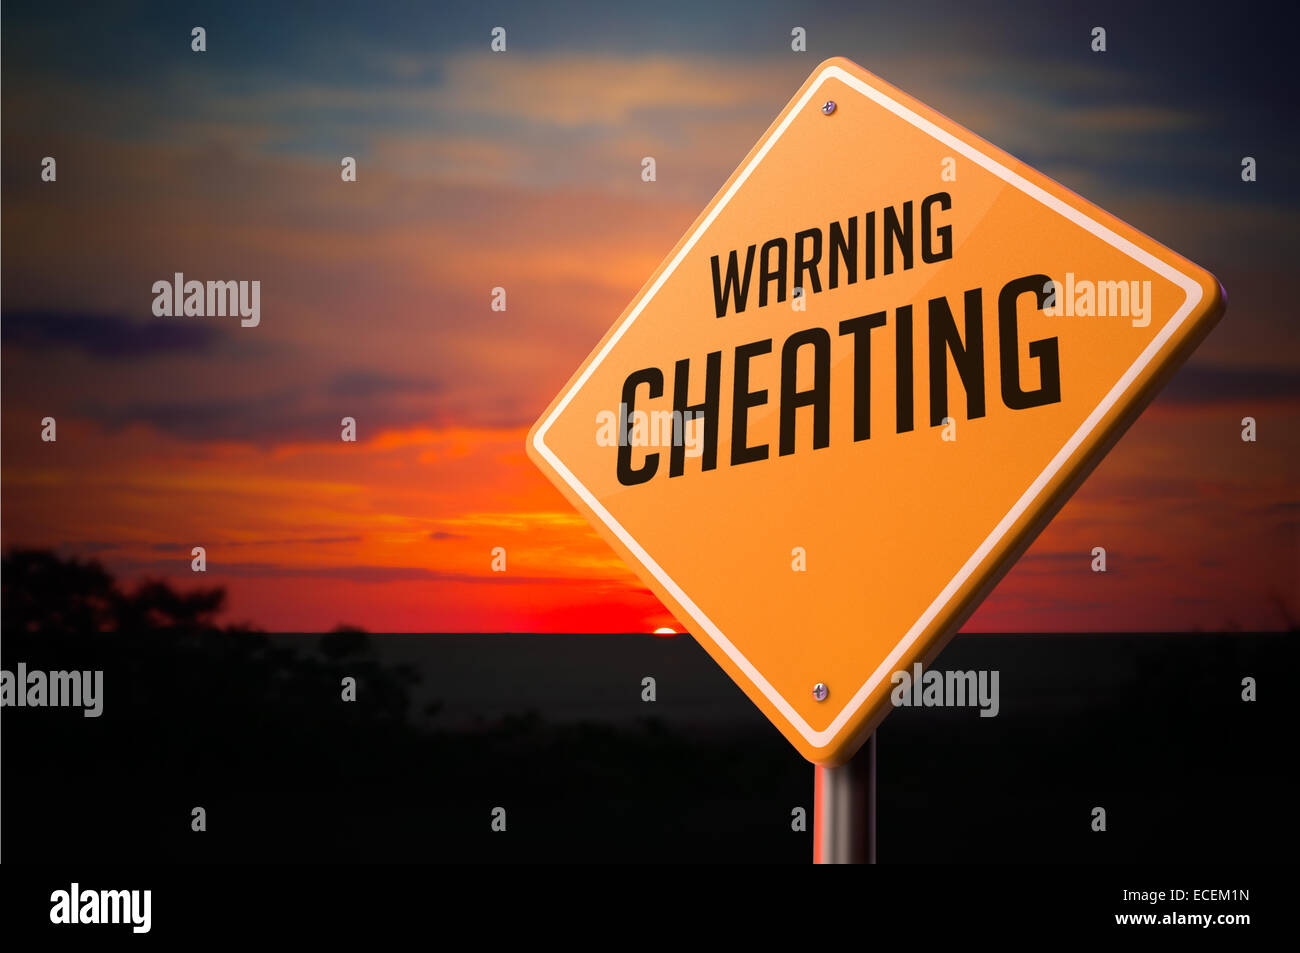 Cheating on Warning Road Sign. Stock Photo